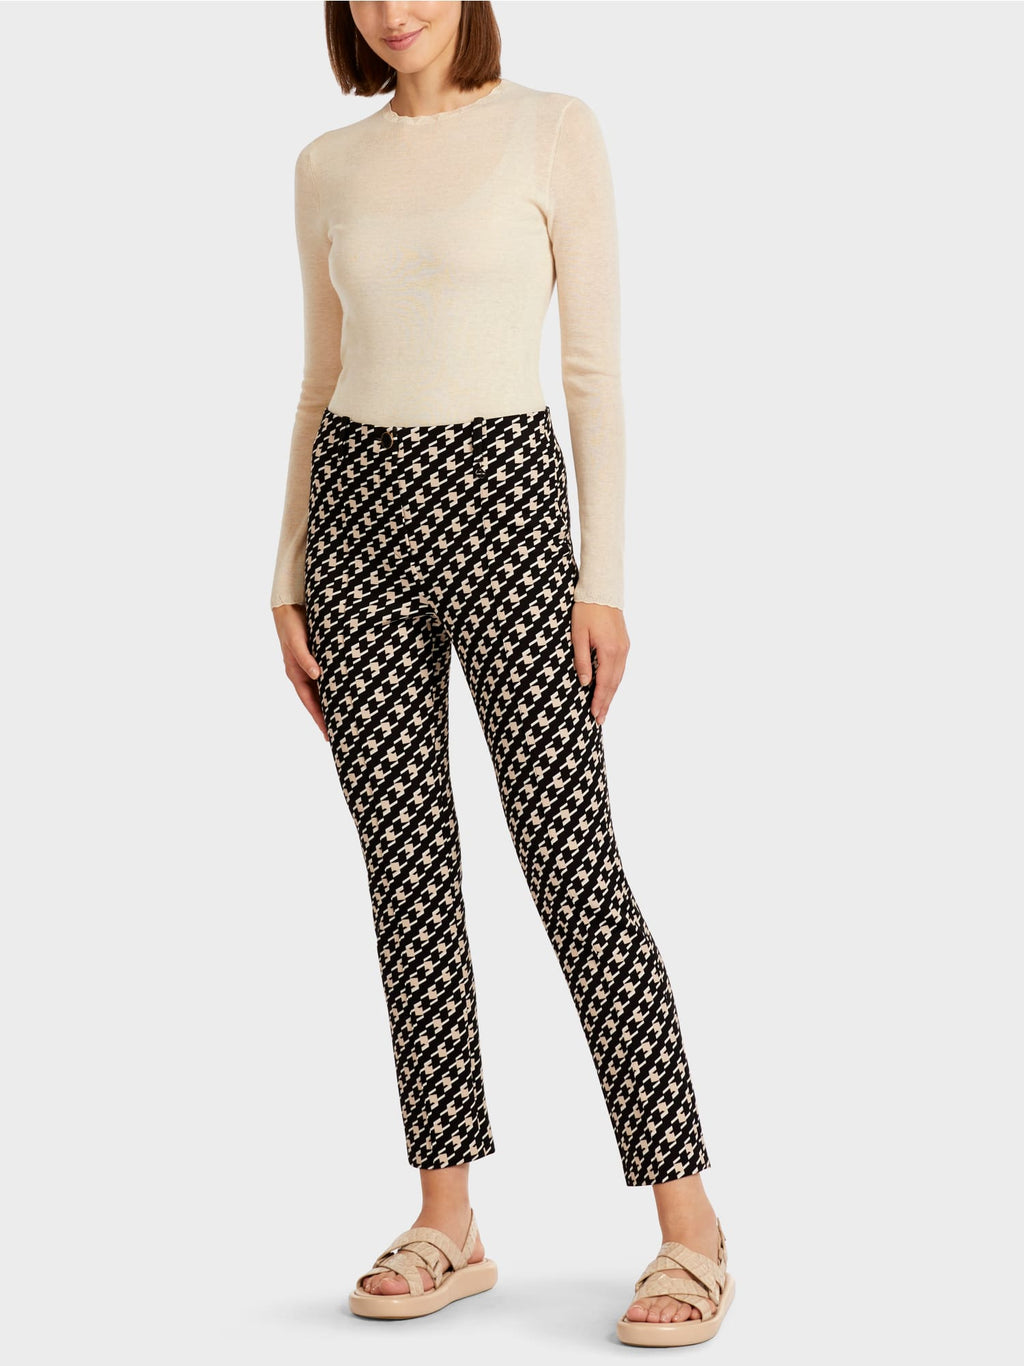 NWT FREE PEOPLE Sz 6 THE THING IS LOW-RISE UTILITY PANTS WILD TRUFFLE